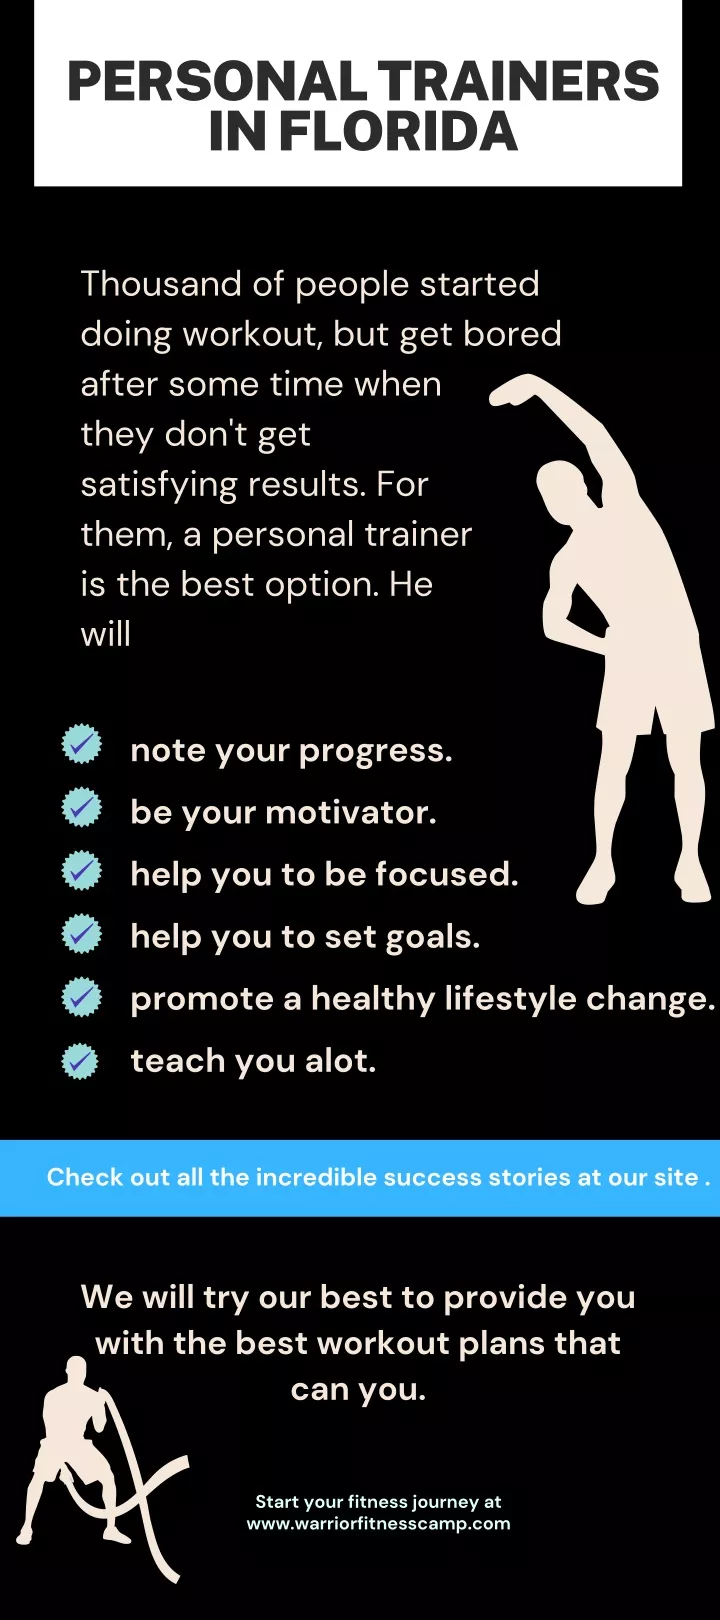 personal trainers in florida